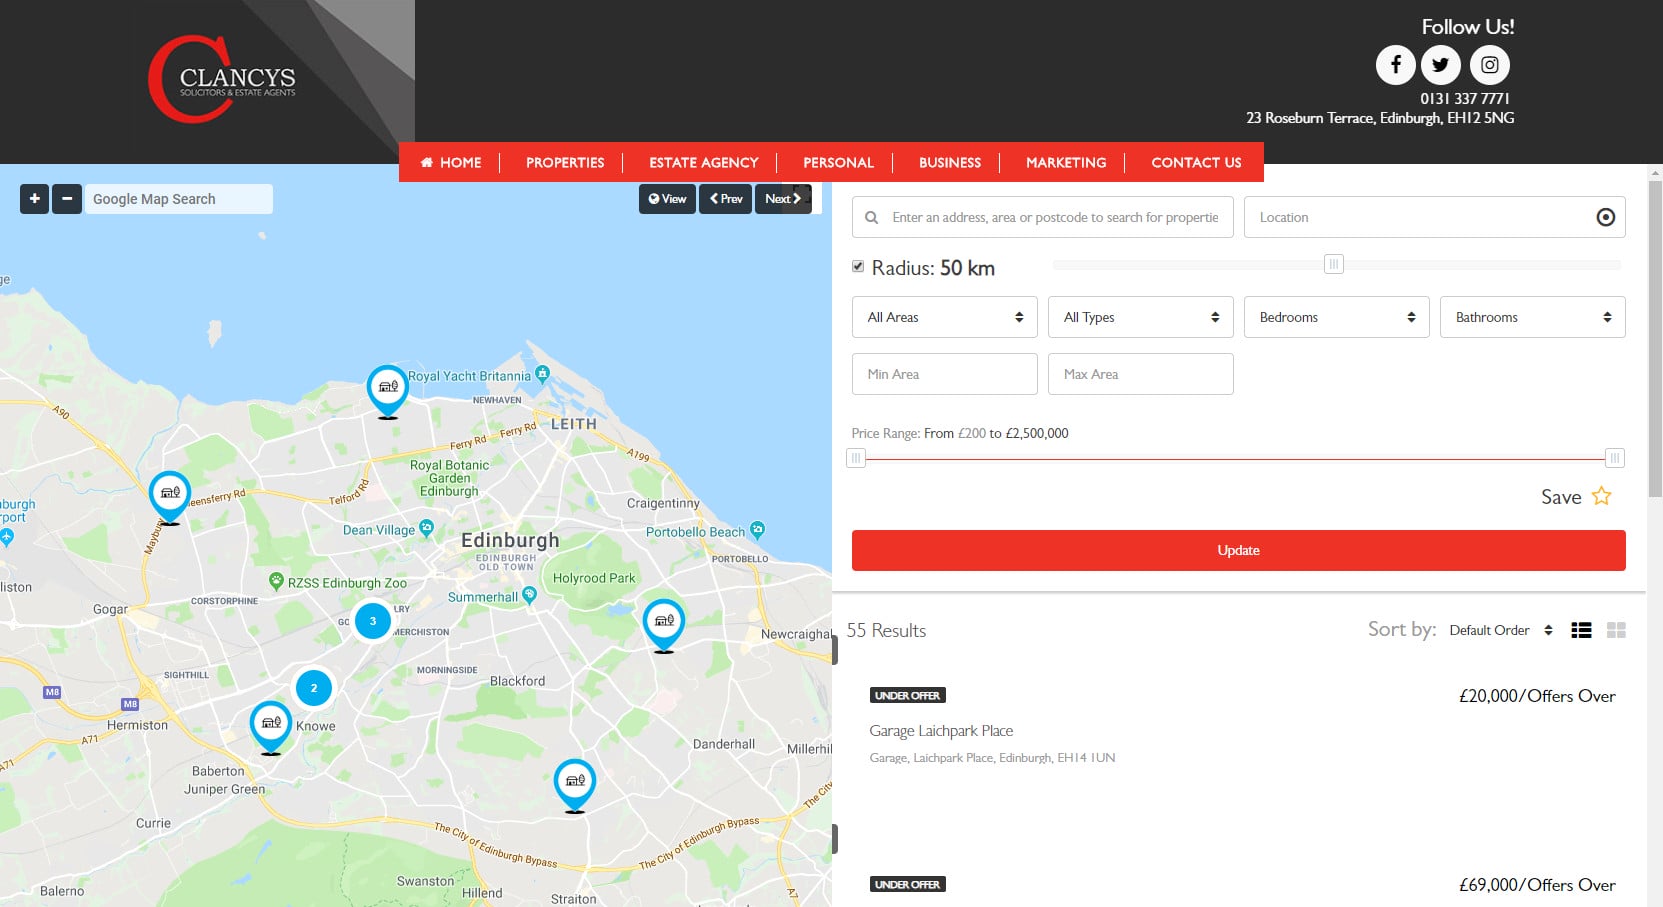 Clancys Solicitors and Estate Agents Map